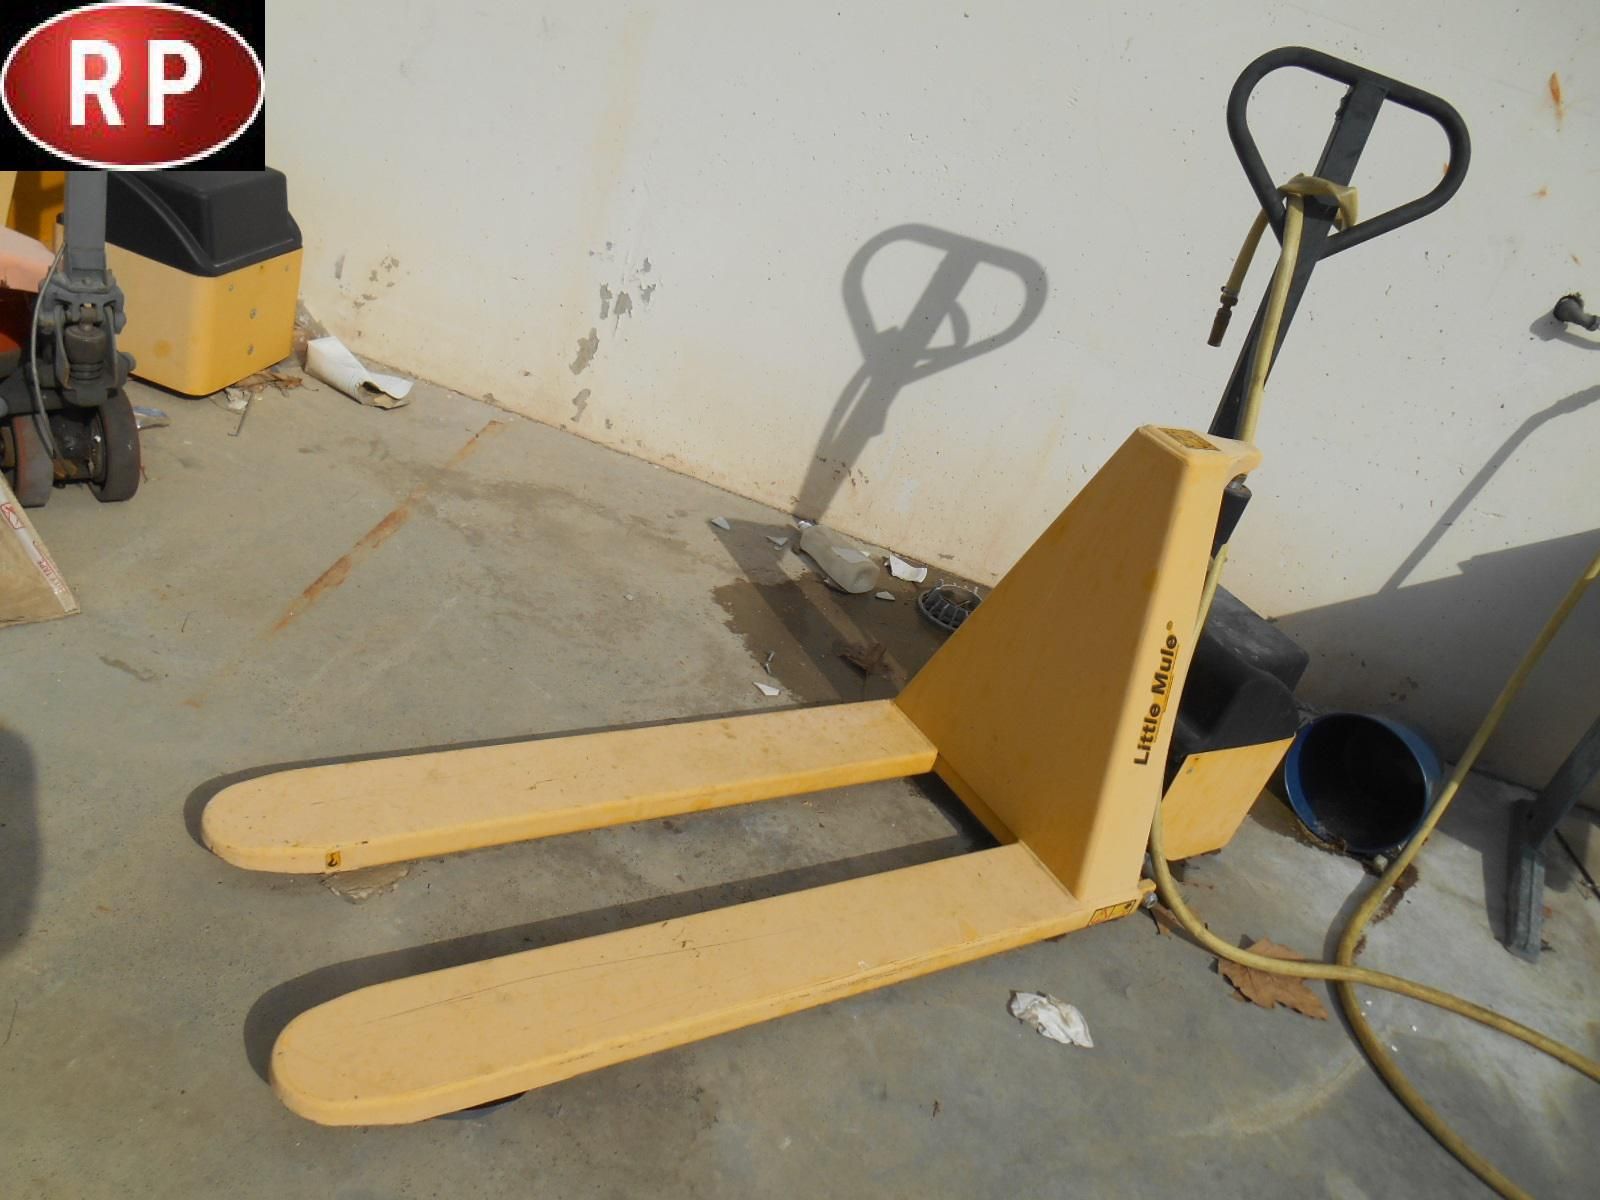 Null RP] Set of 6 pallet trucks, working condition unknown:
- 2 x LITTLE MULE, 1&hellip;